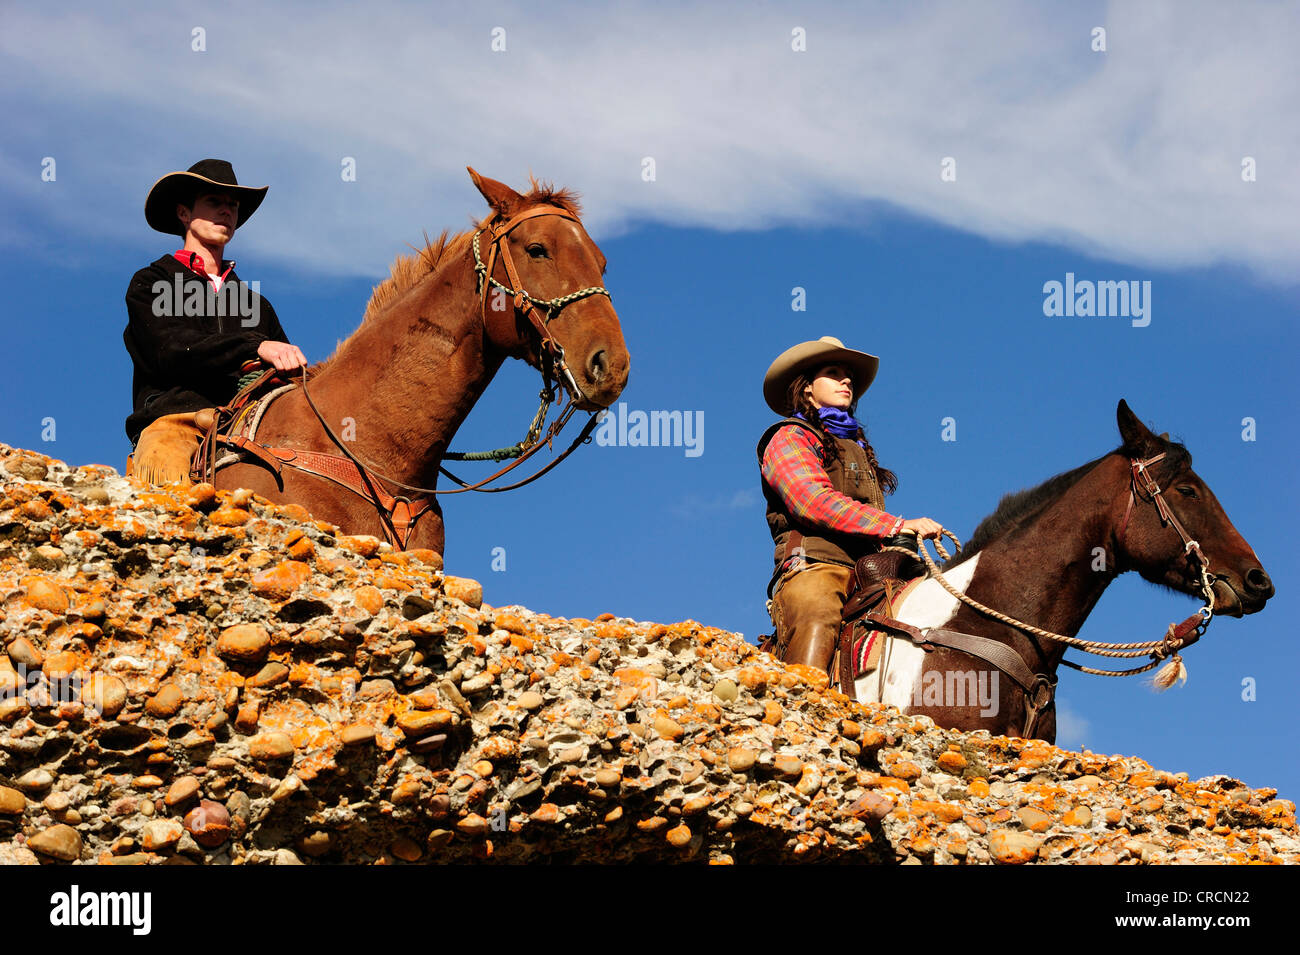 Cowboy and cowgirl on horses looking into the distance, Saskatchewan, Canada, North America Stock Photo